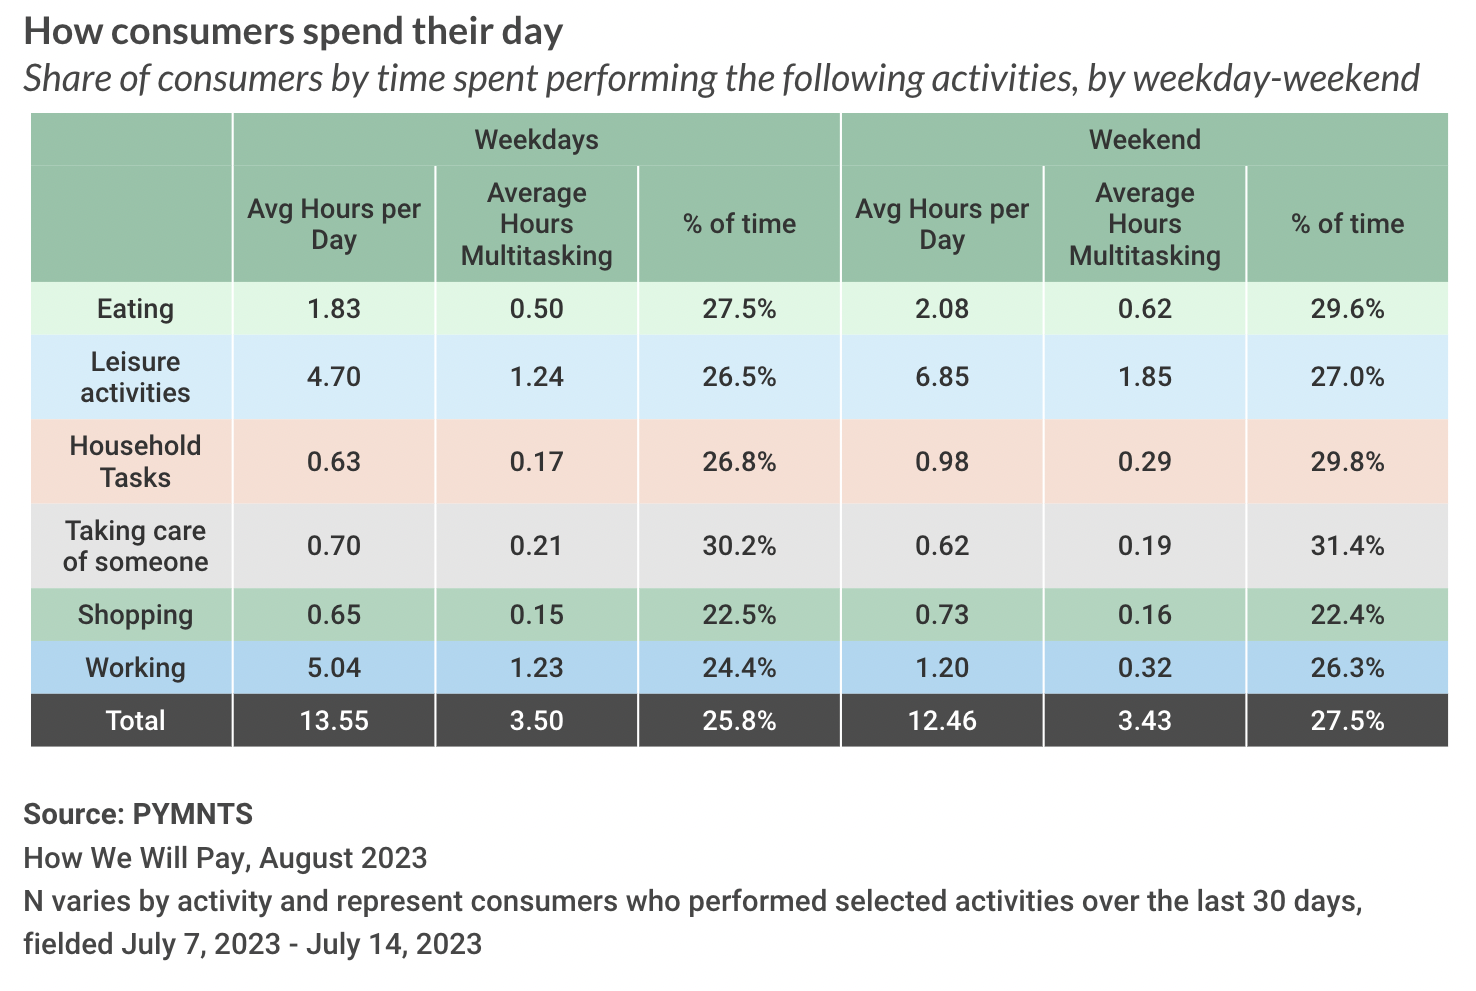 How consumers spend their day